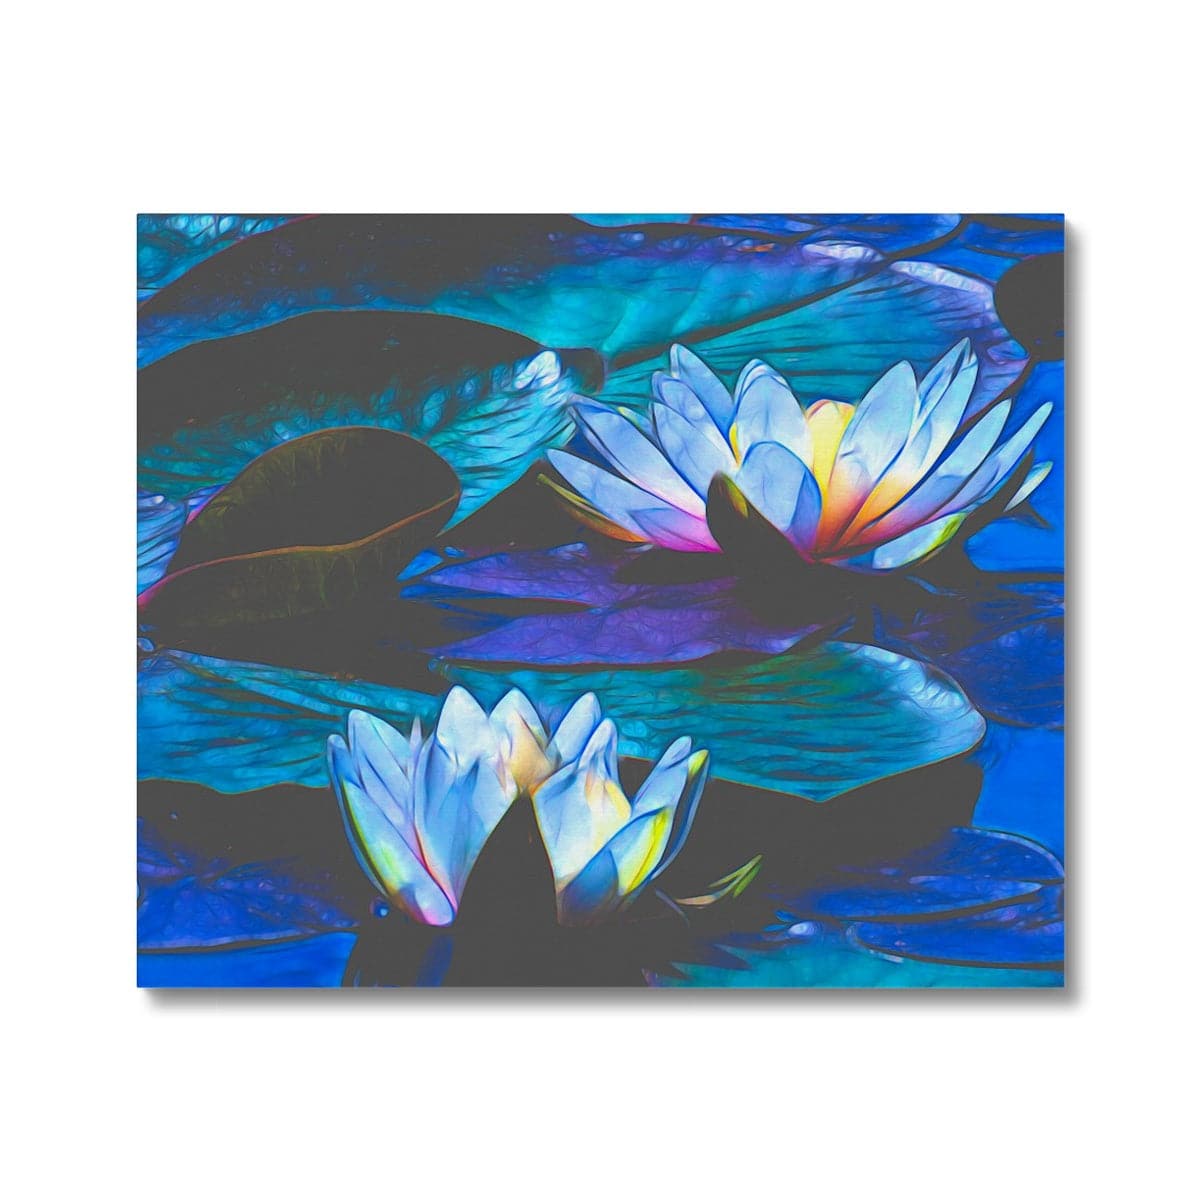 Blue waterlilies _3, by Mother Nature Art, Canvas